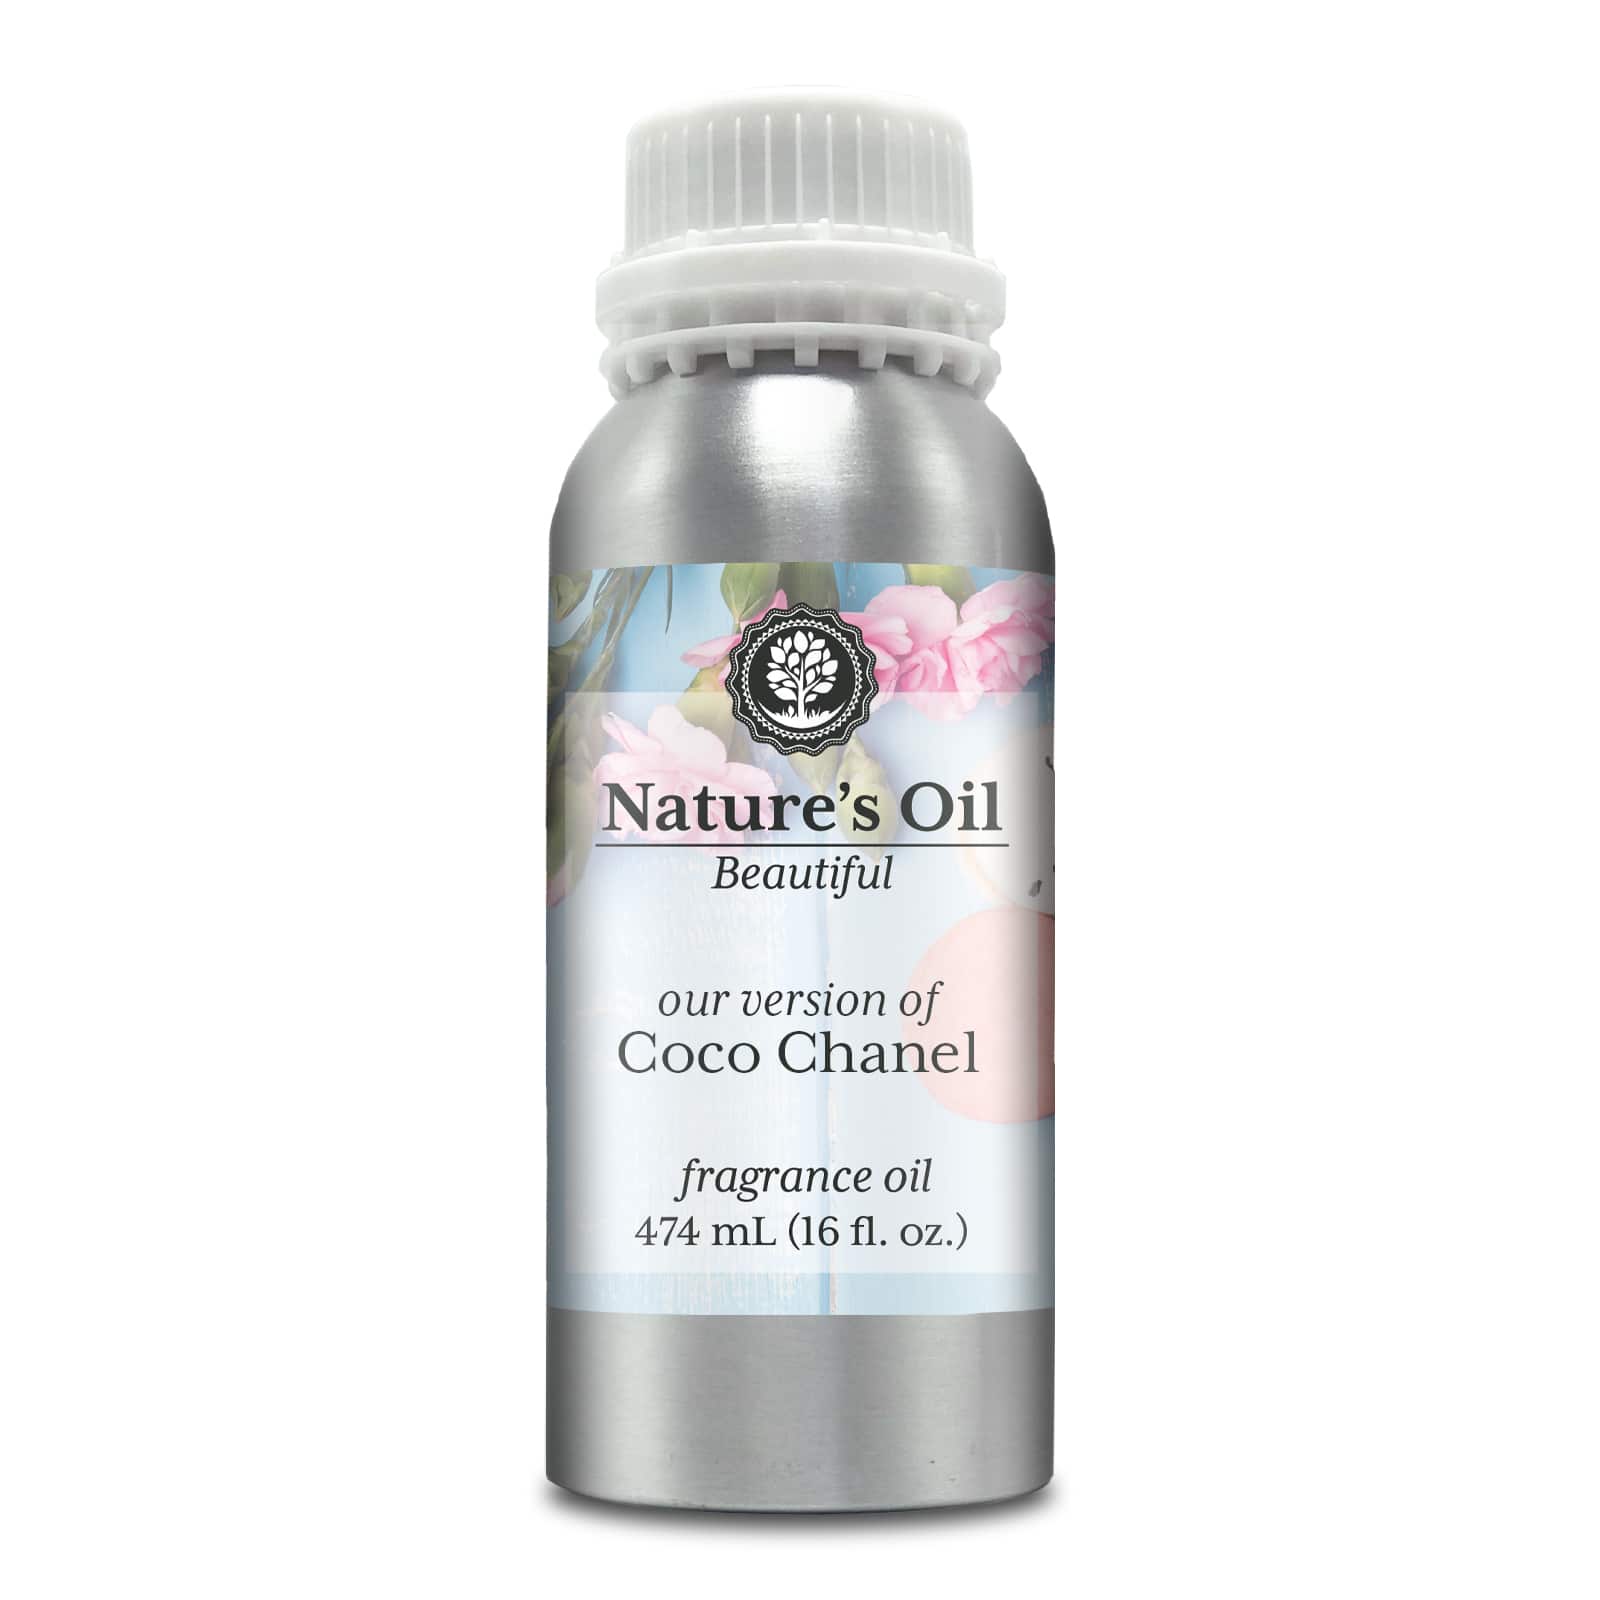 Nature's Oil Our Version of Coco Chanel Fragrance Oil